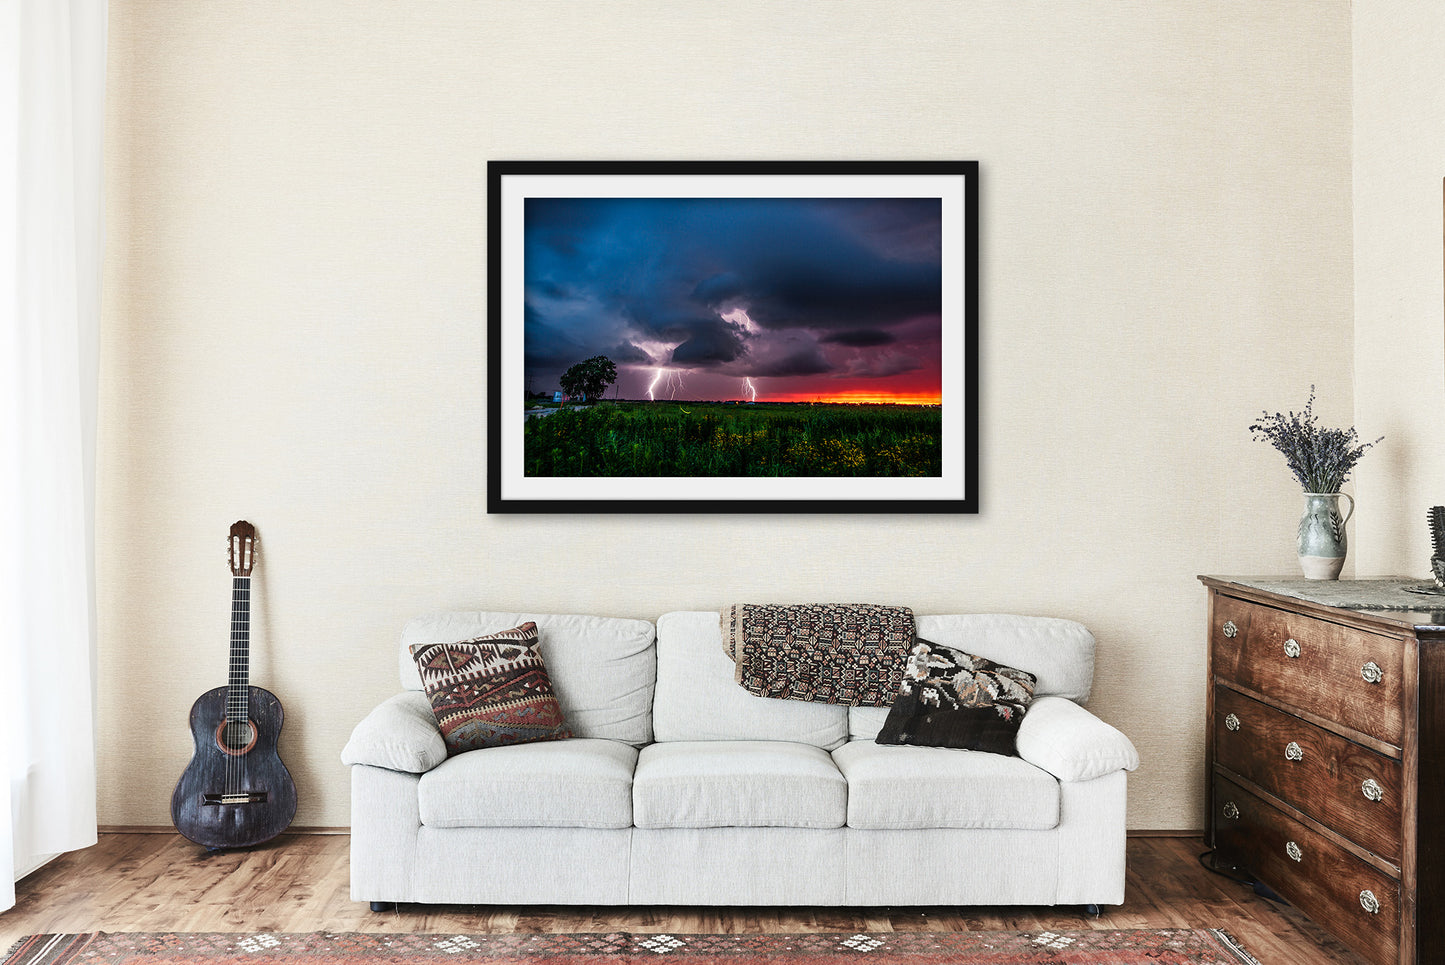 Storm Framed and Matted Print | Lightning Photo | Firefly Decor | Oklahoma Photography | Thunderstorm Wall Art | Ready to Hang